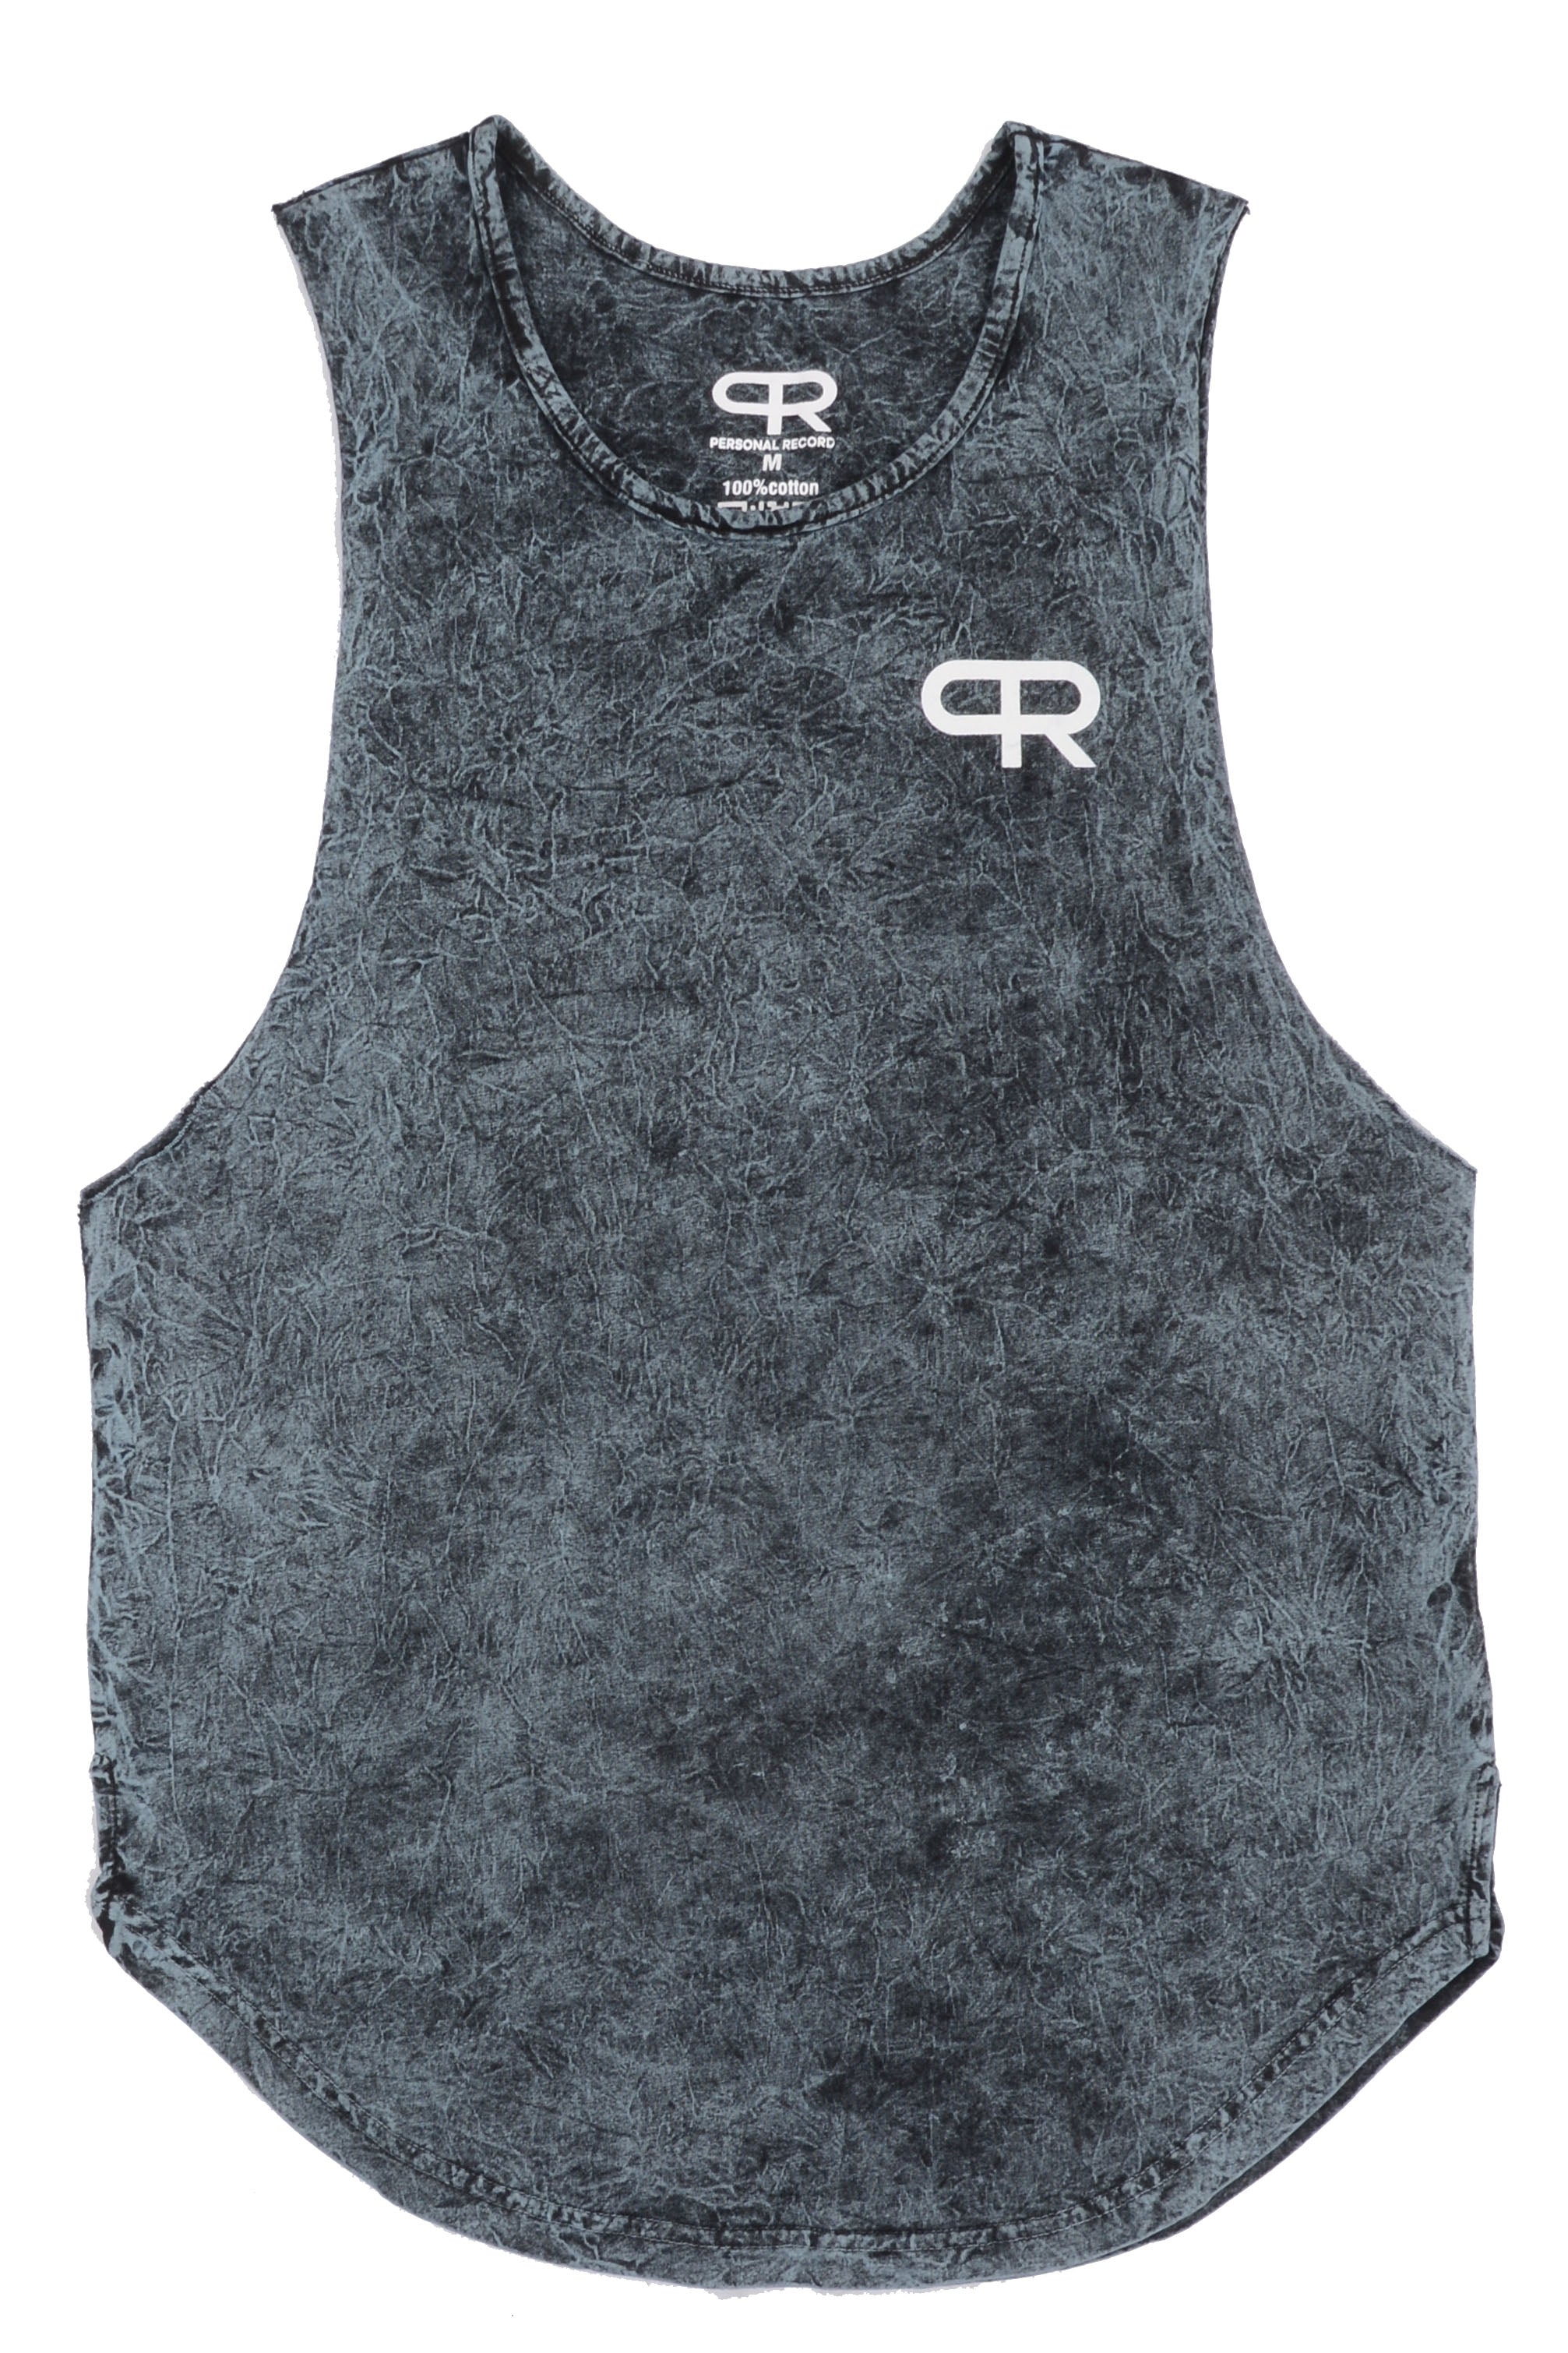 Personal Record Muscle Tank - PR309 - Mineral Stone Wash